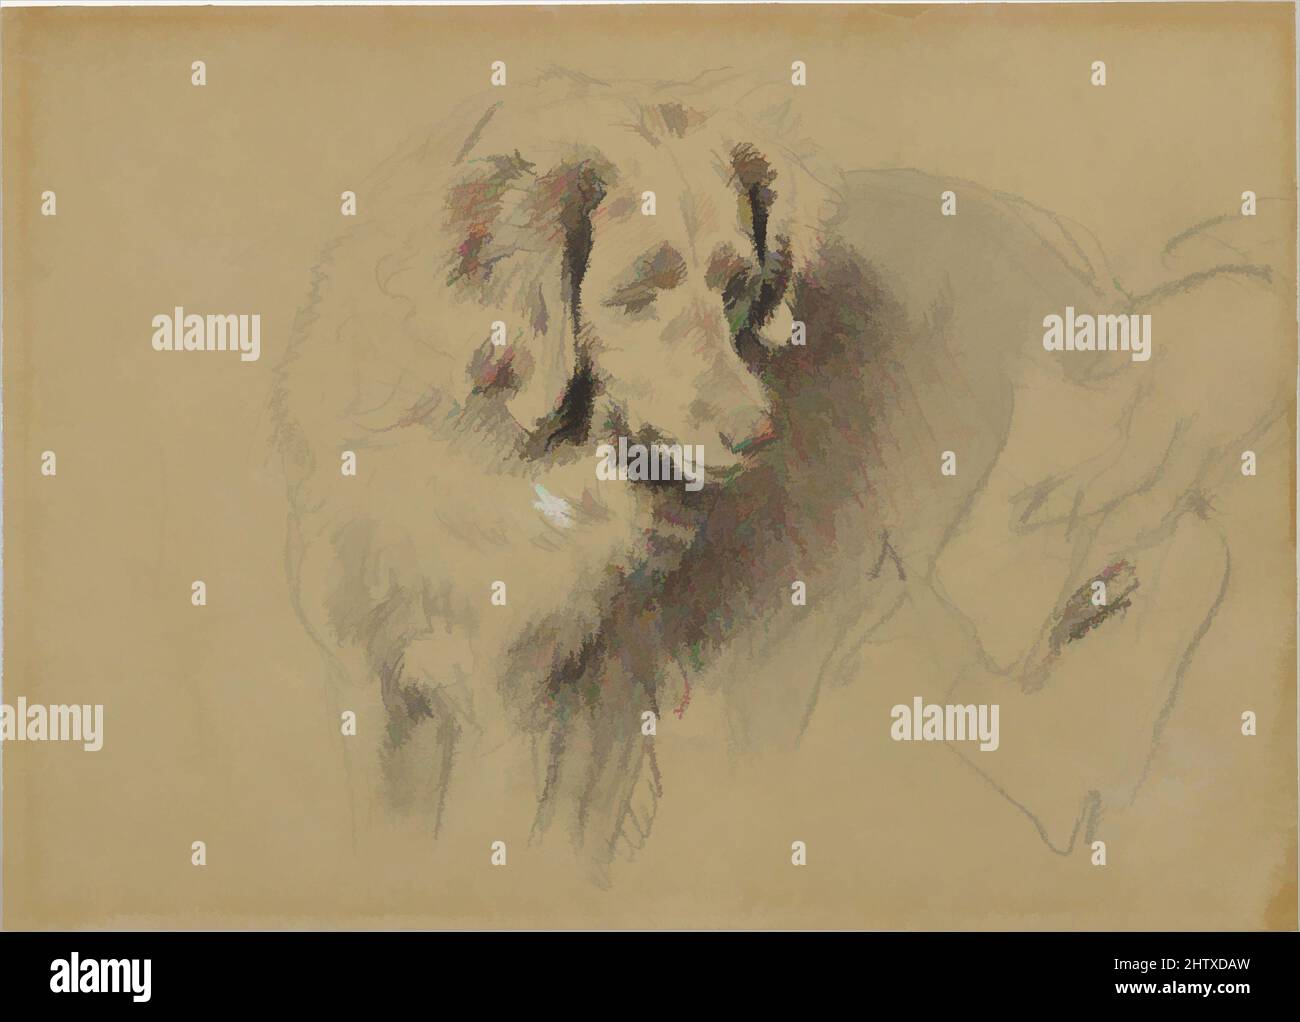 Art inspired by Study of a Dog, 1820–73, Black chalk heightened with white and red chalk, sheet: 6 15/16 x 9 3/4 in. (17.7 x 24.7 cm), Drawings, Sir Edwin Henry Landseer (British, London 1802–1873 London), The careful preparations that underpinned Landseer's accomplishments as an, Classic works modernized by Artotop with a splash of modernity. Shapes, color and value, eye-catching visual impact on art. Emotions through freedom of artworks in a contemporary way. A timeless message pursuing a wildly creative new direction. Artists turning to the digital medium and creating the Artotop NFT Stock Photo